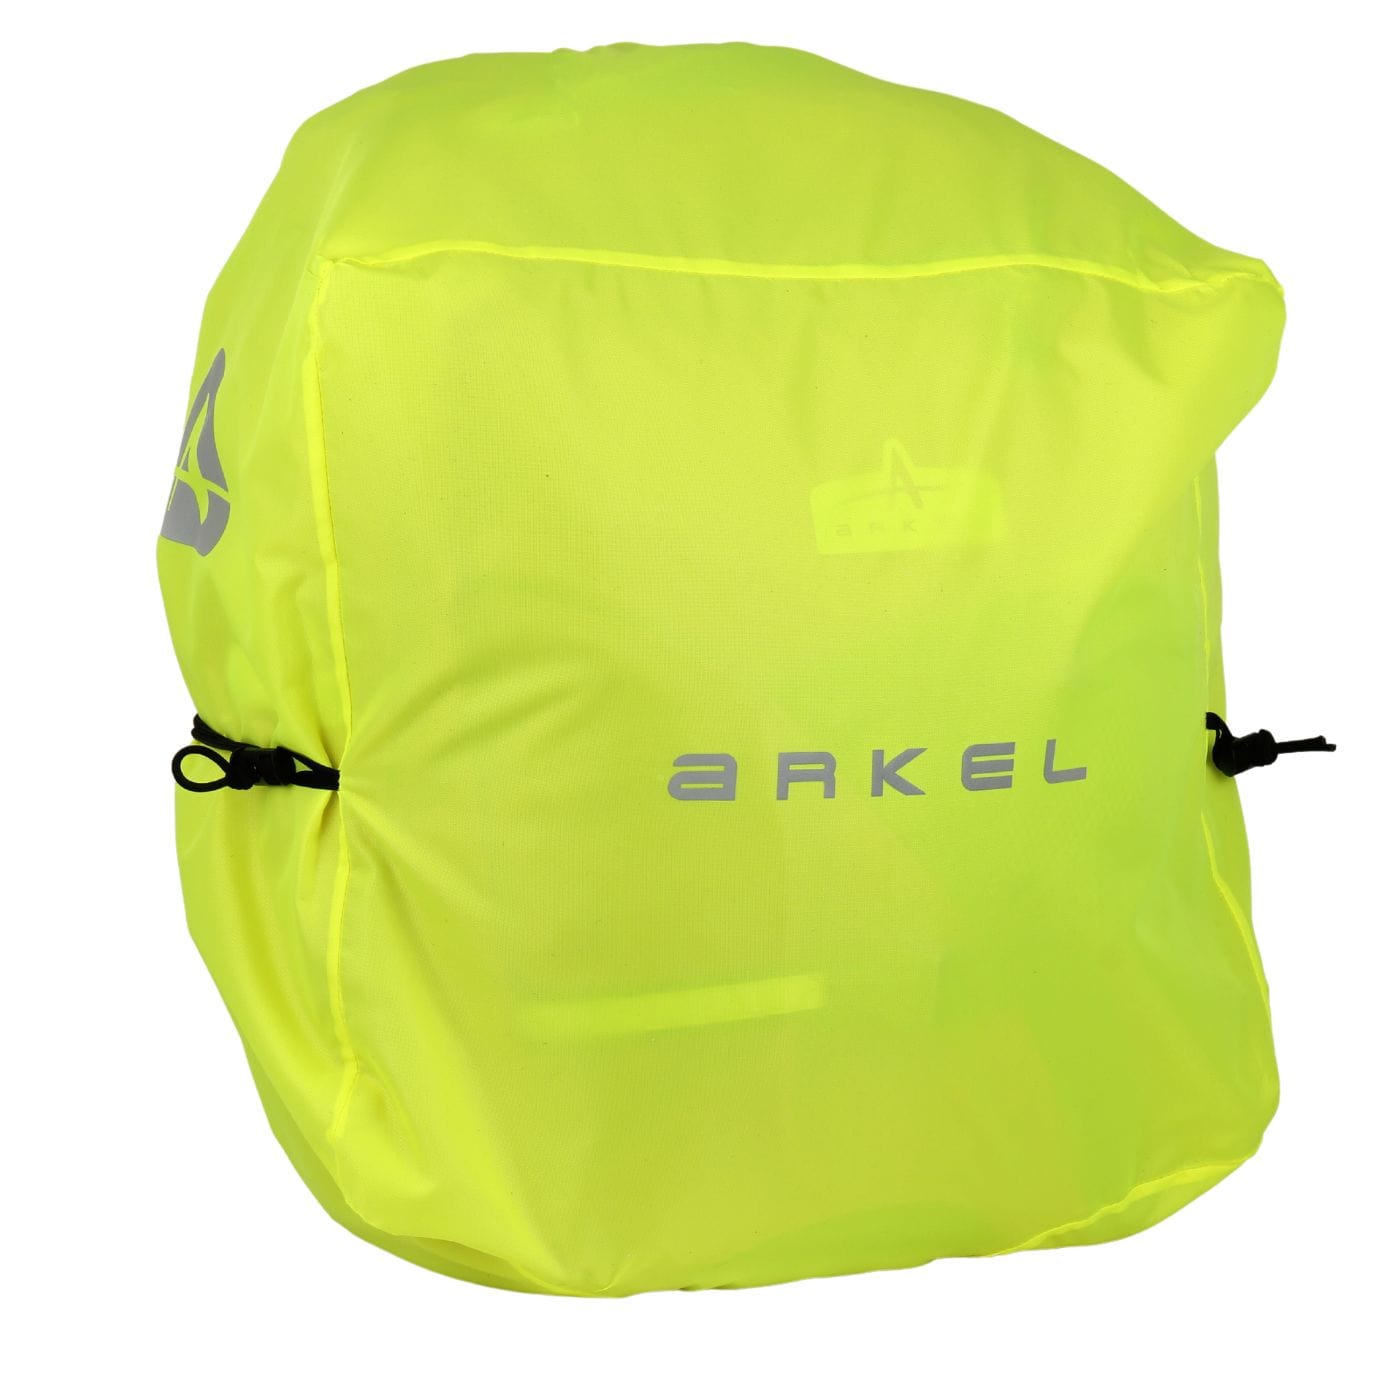 Arkel Bike Bags Yellow / S Safety Hi Vis Yellow Protective Rain Covers - Yellow